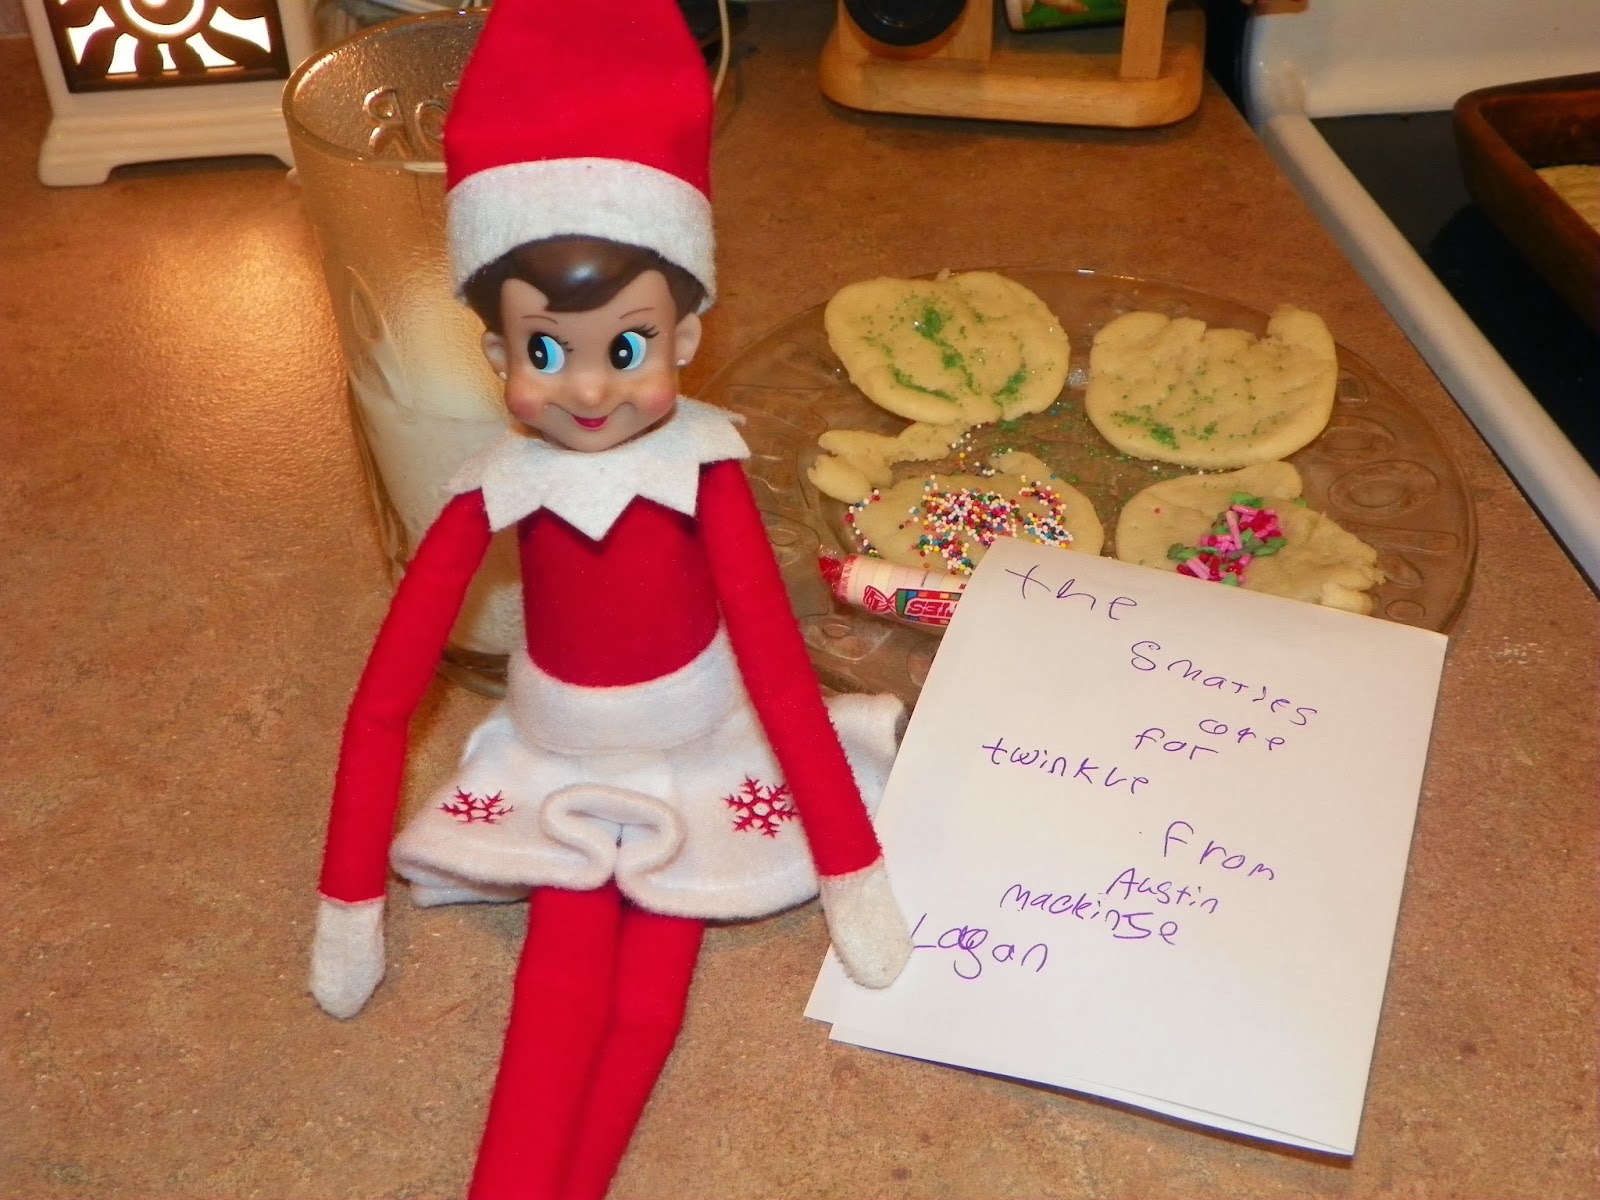 Find more Riches at Christs Expense Elf on the Shelf Cookies Smarties. 